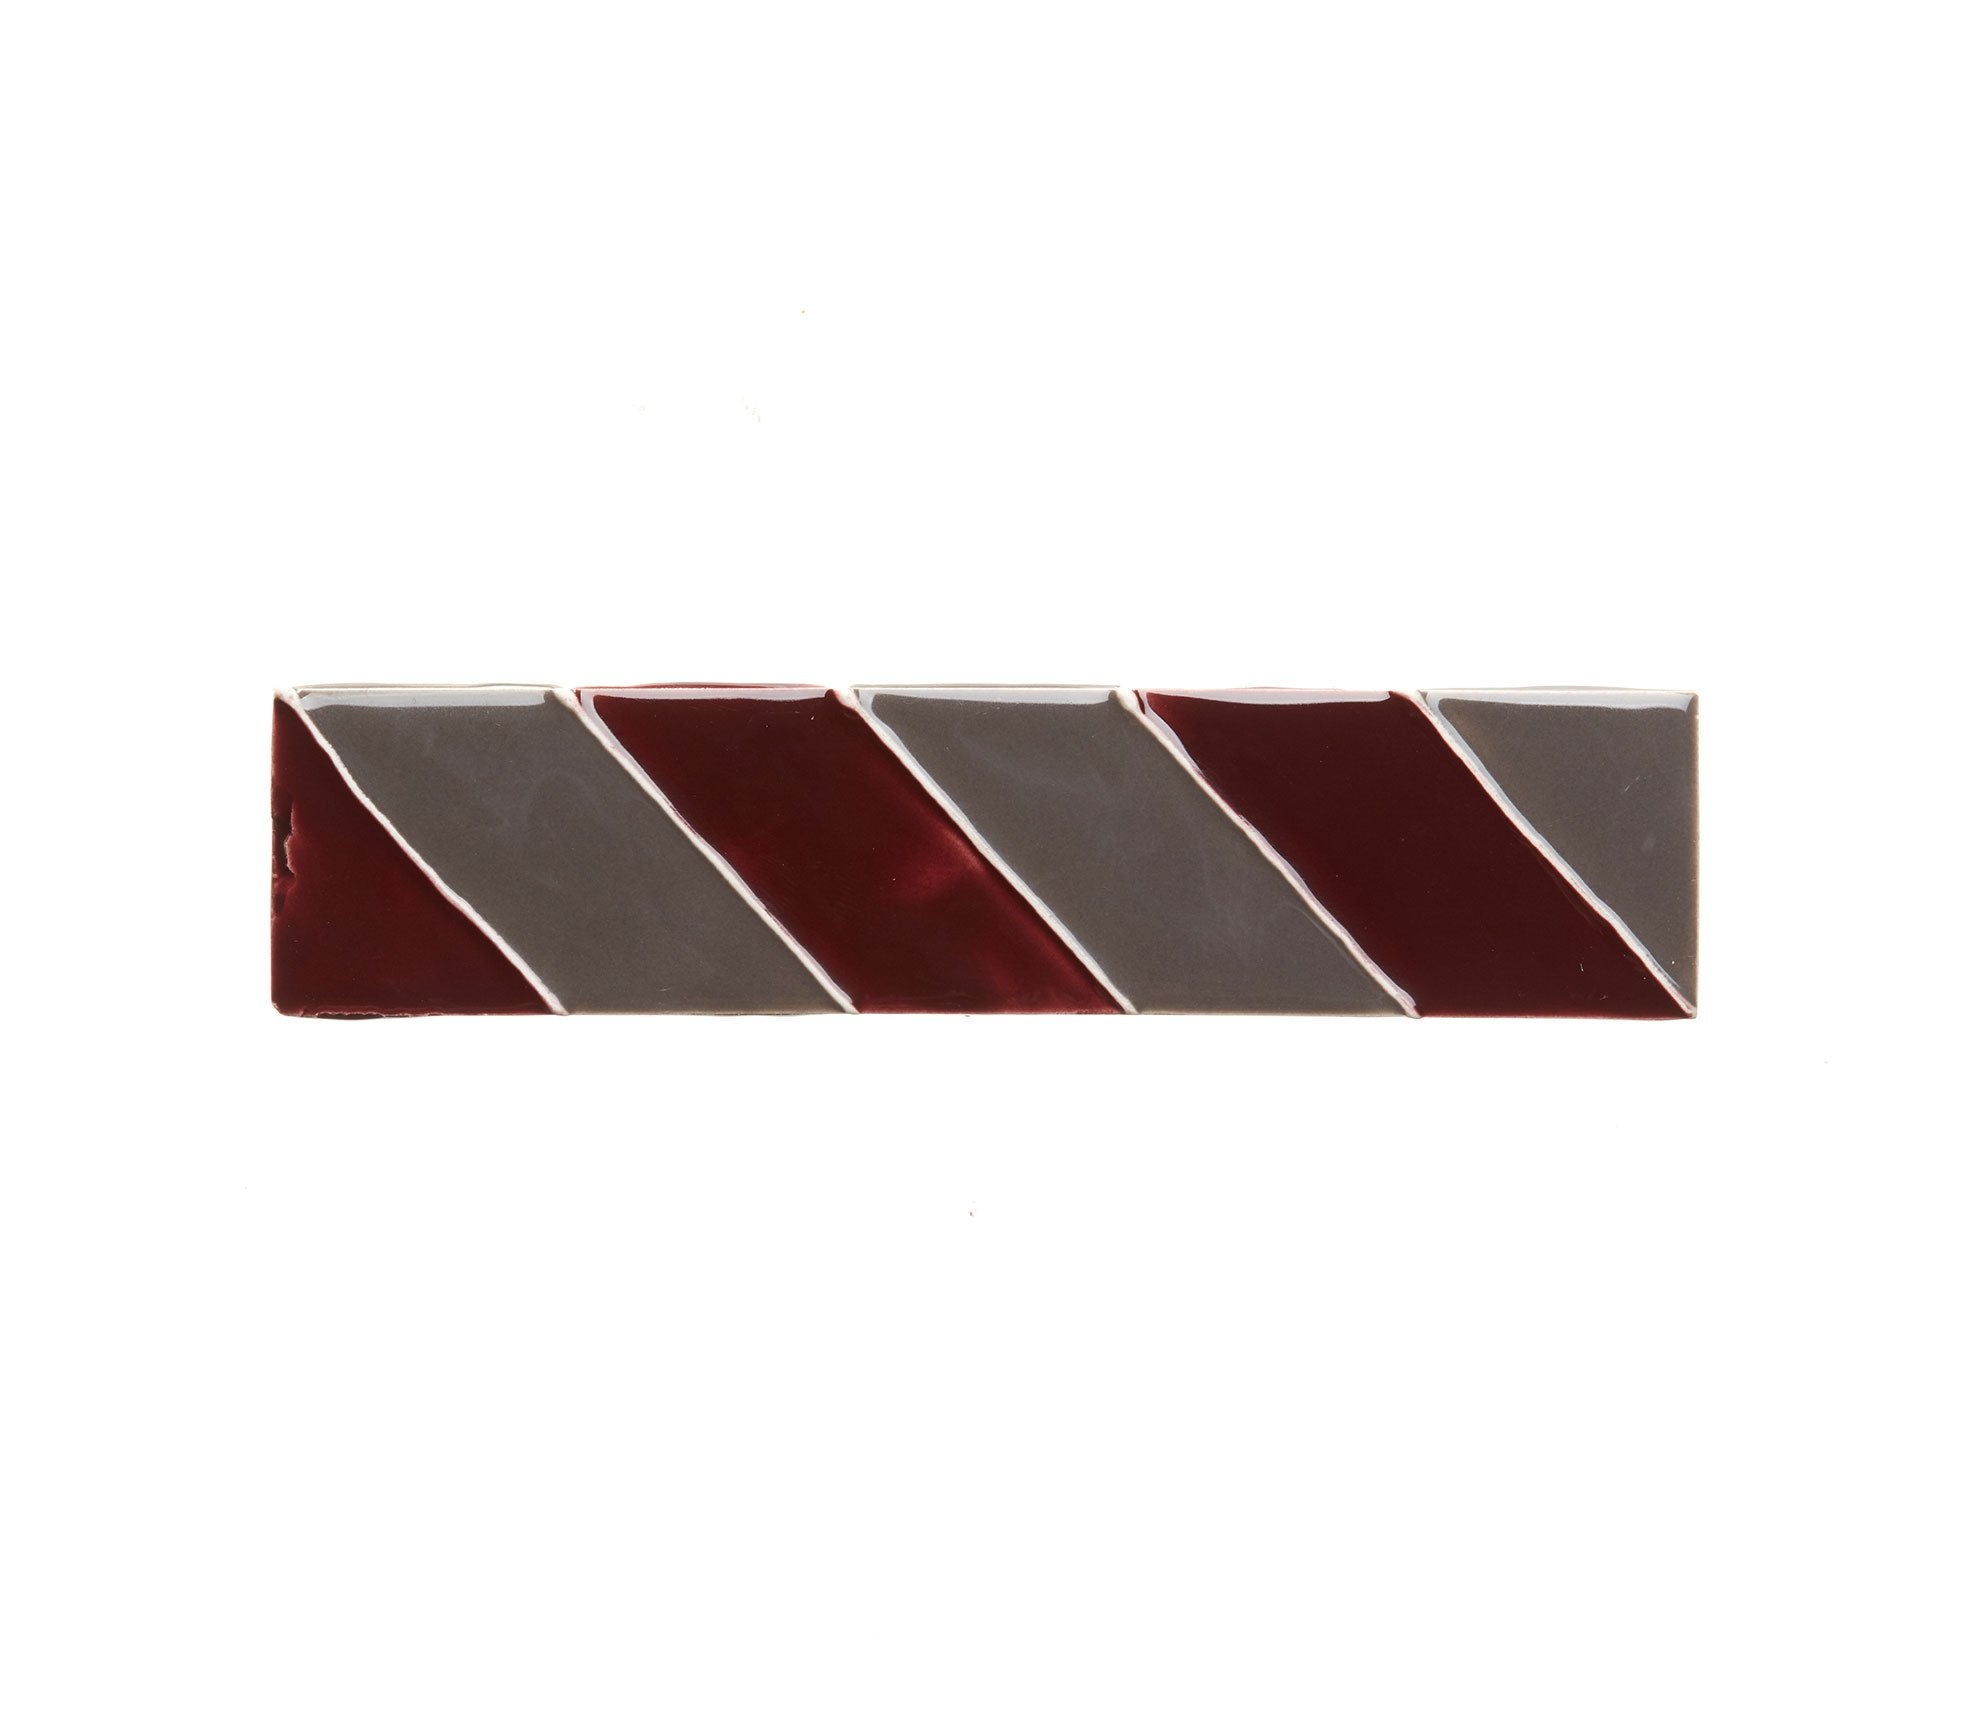 Hanley Tube Lined Decorative Tiles Product Image 20